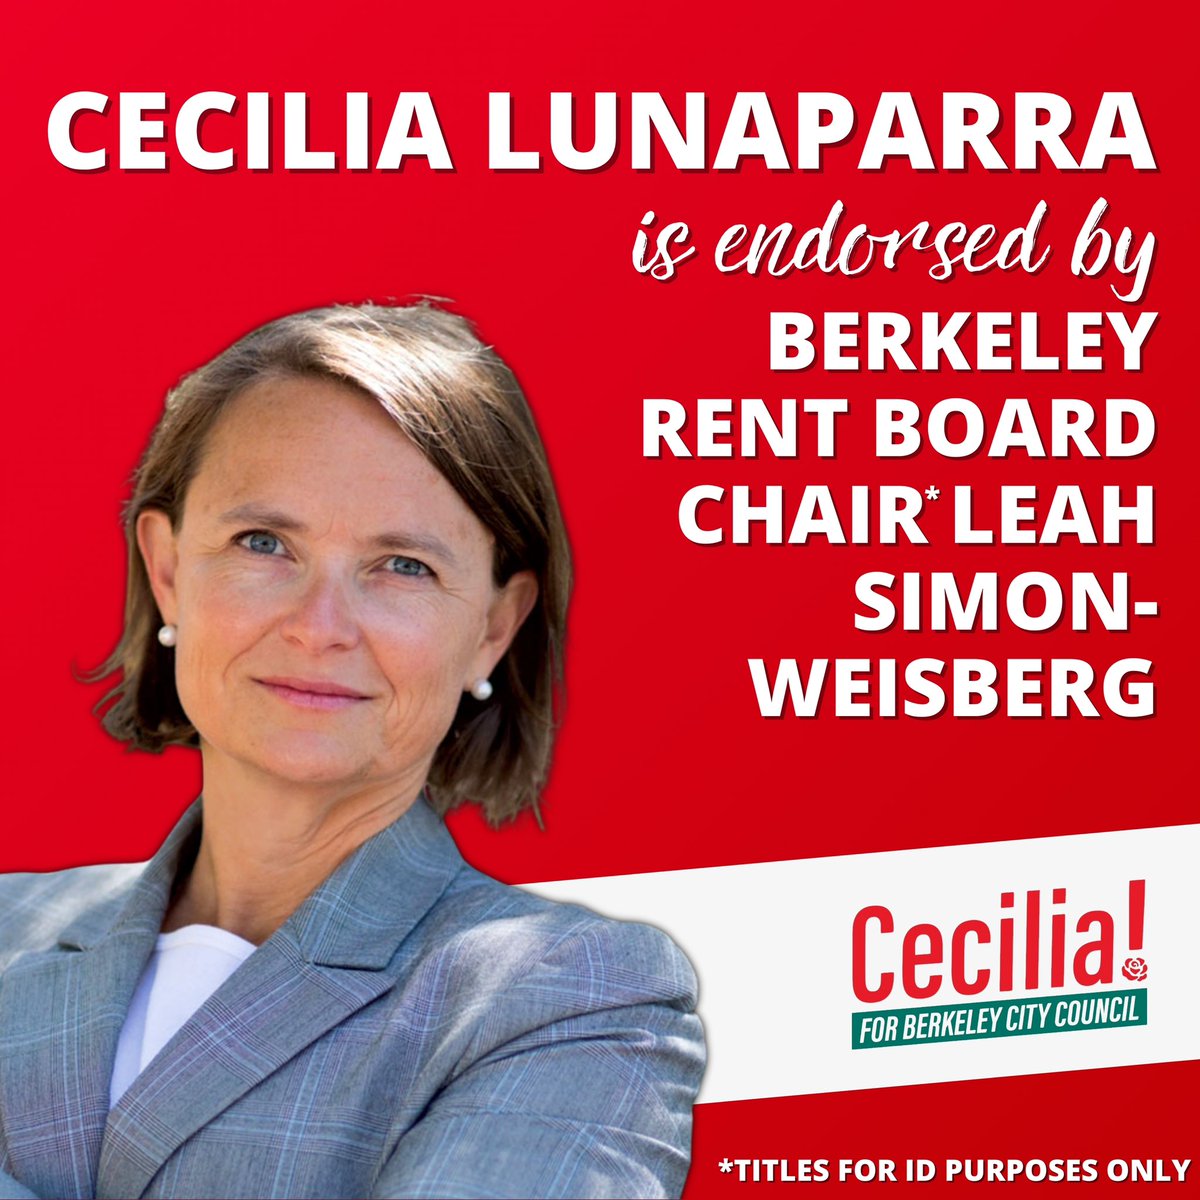 Many thanks to Berkeley Rent Board Chair* Leah Simon-Weisberg for her endorsement! Leah is doing the essential work of advocating for Berkeley tenants against private property and landlord interests, and I greatly appreciate her support. 🏡 (*titles for ID purposes only)